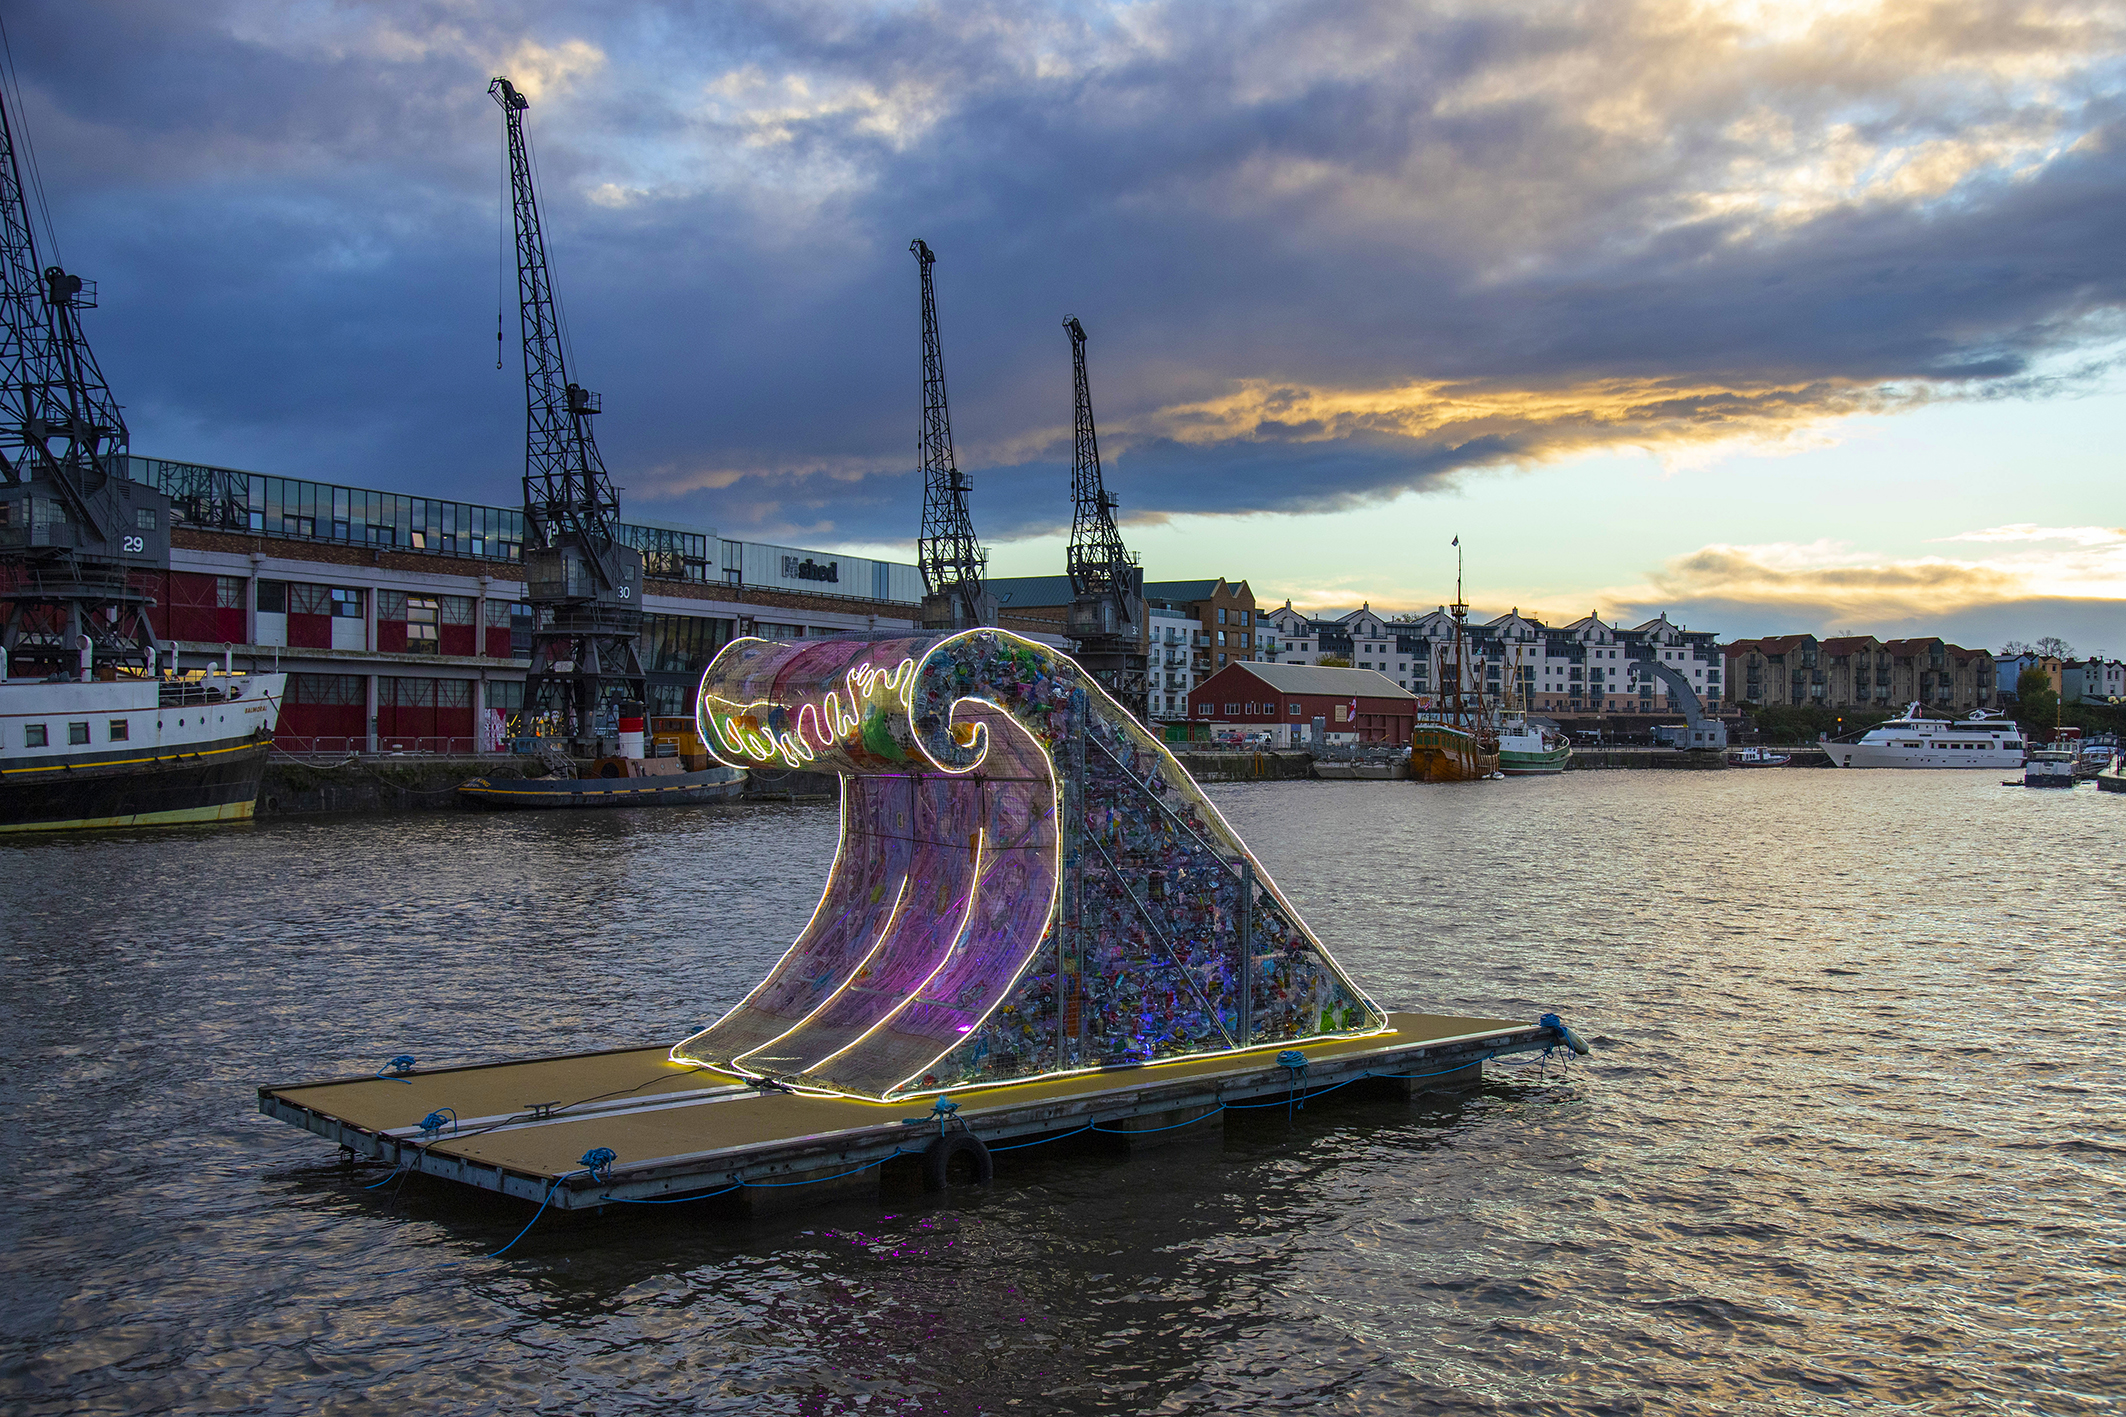 A giant wave sculpture made from rubbish sits on a floating pontoon on Bristol harbour. In the background are the iconic Bristol cranes outside of the M Shed. The clouds in the sky are grey and moody and the sculpture is lit up with strings of coloured lights.